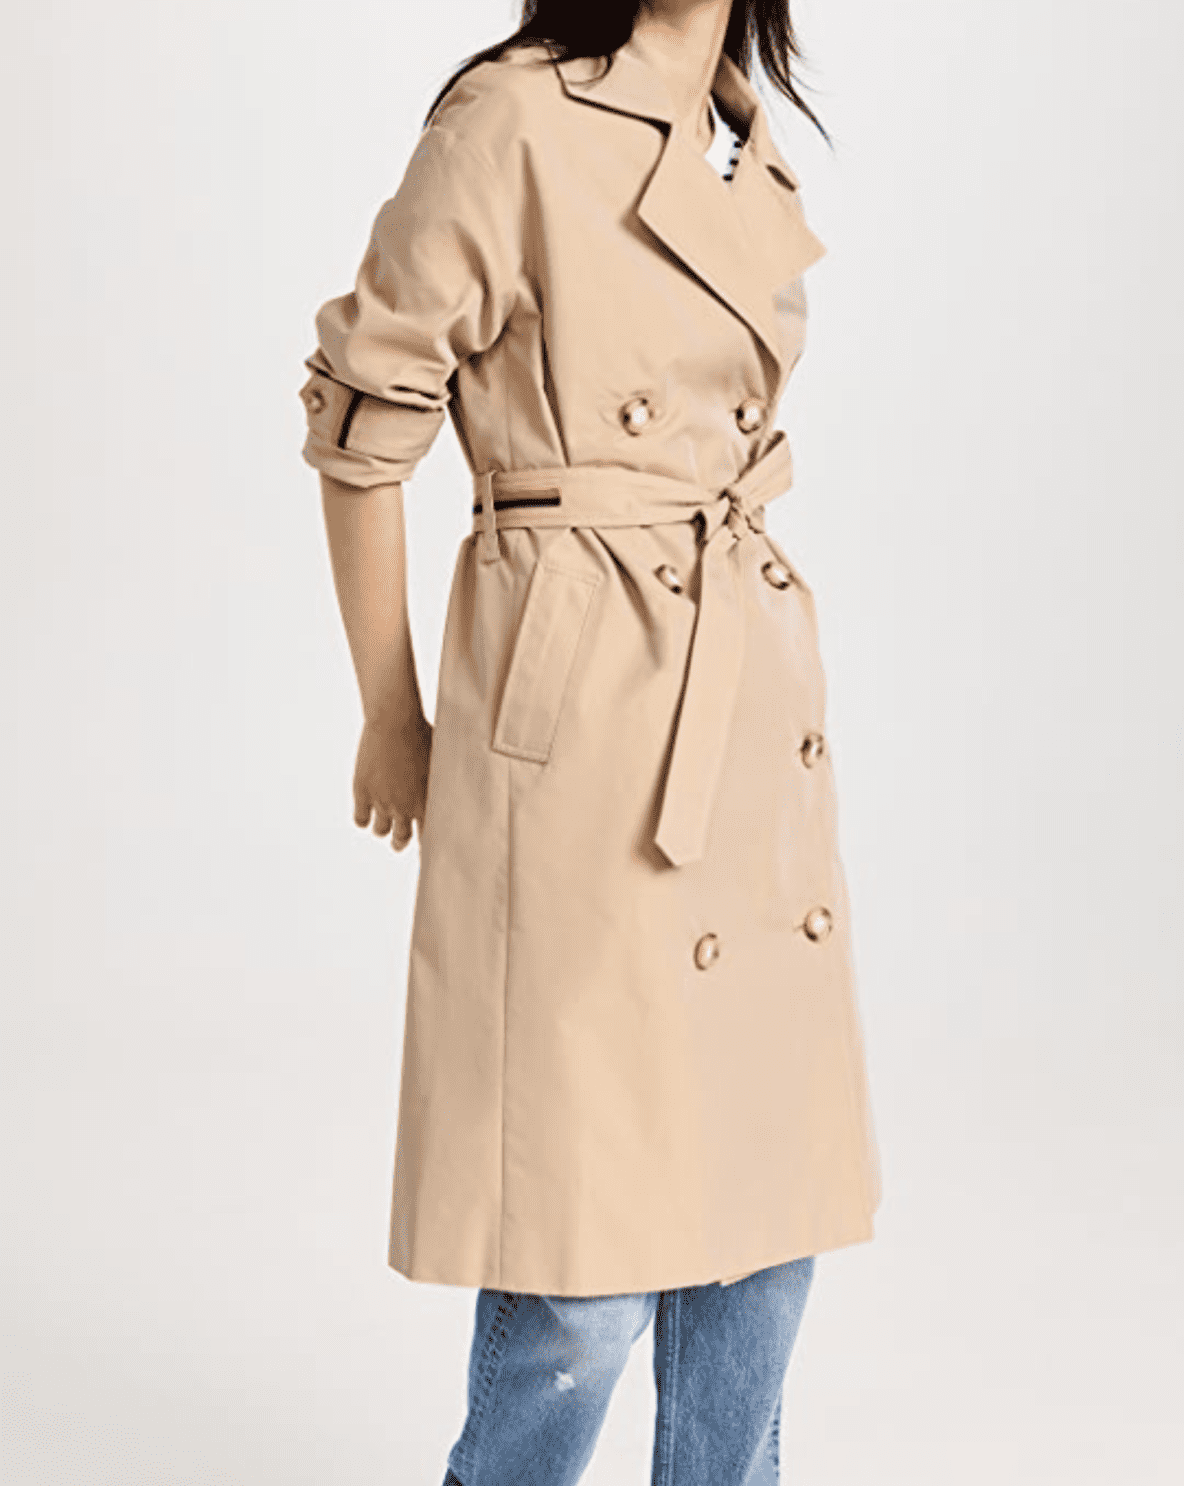 KULE The Rox Trench